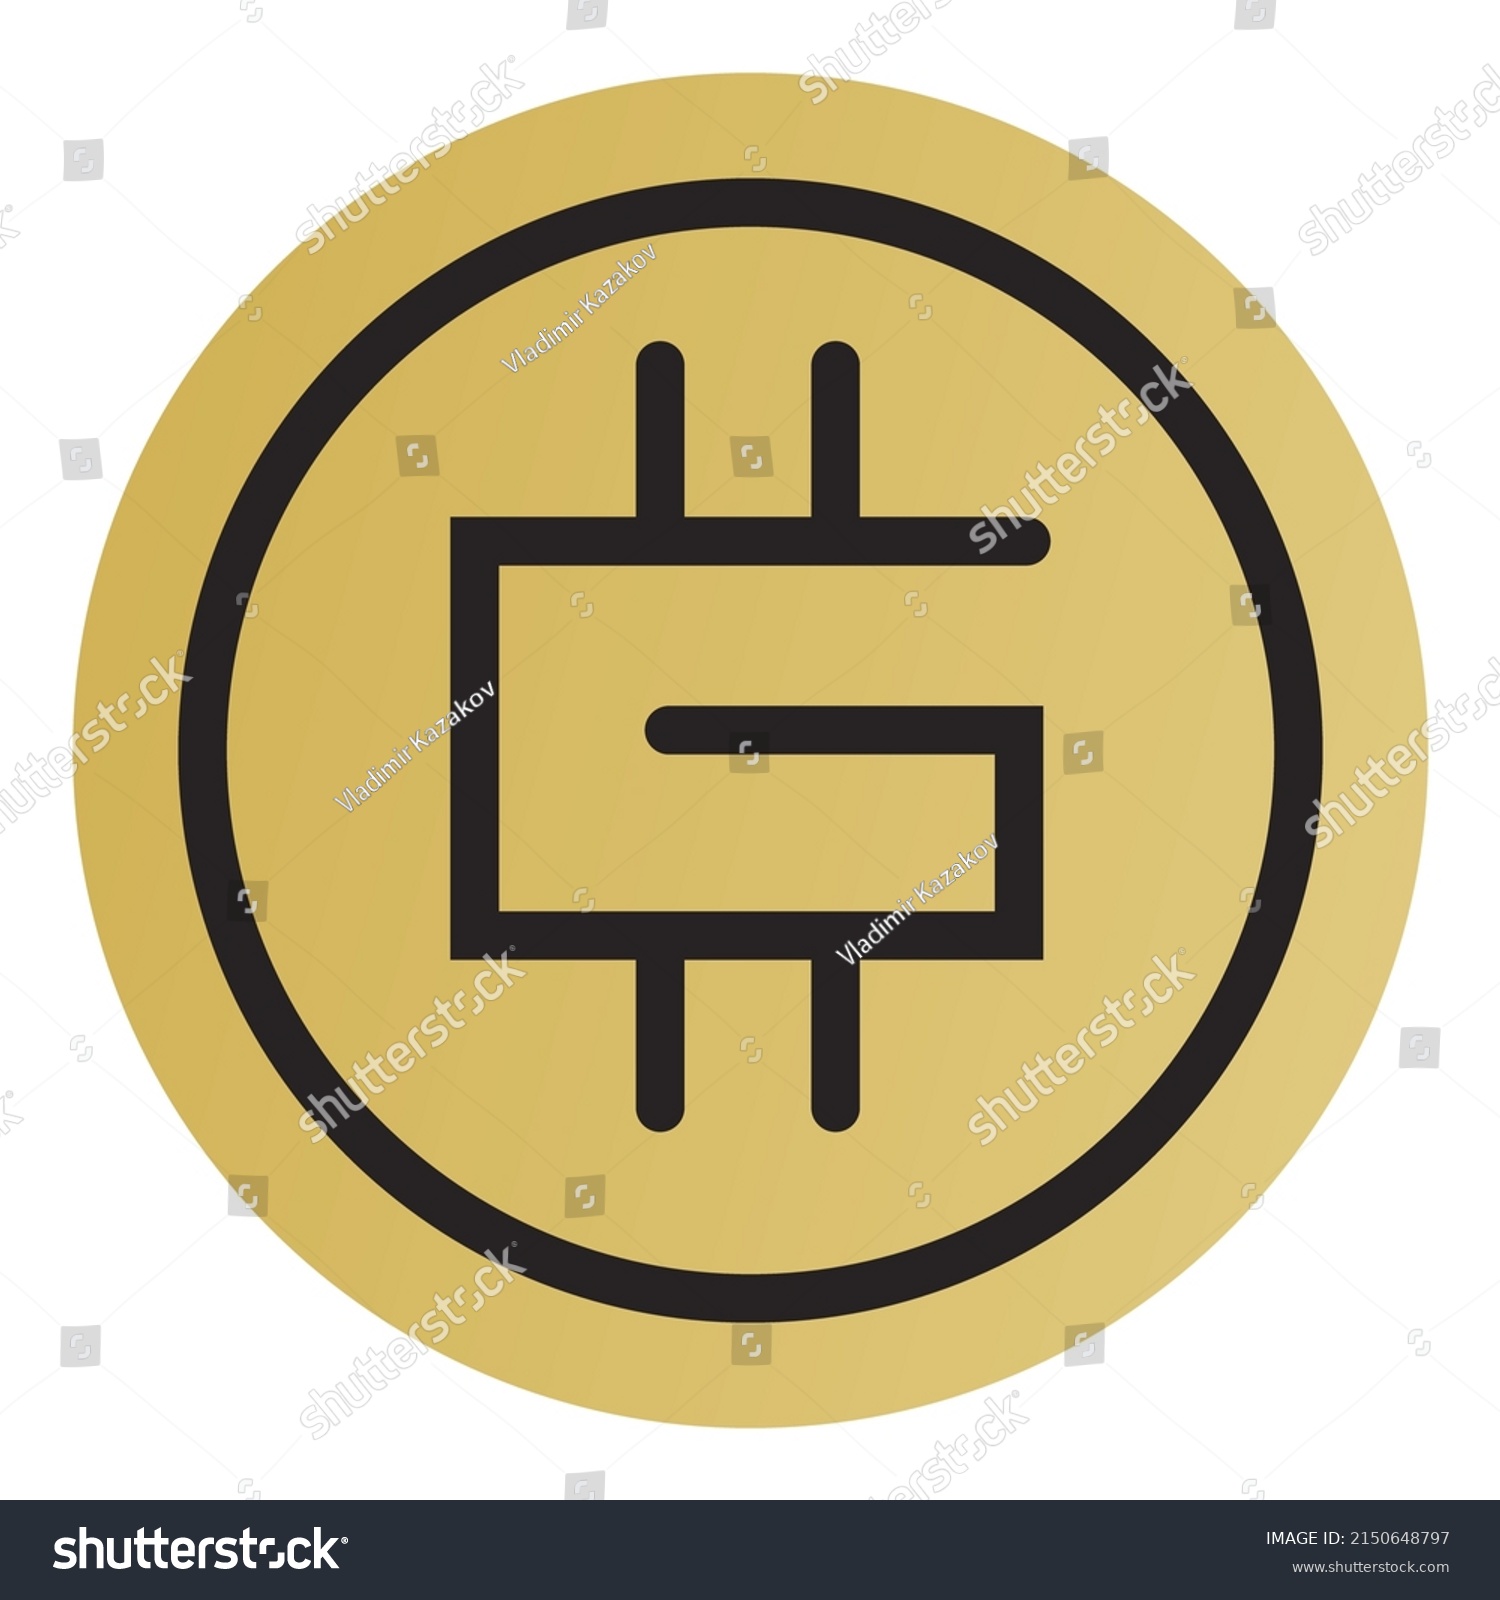 SVG of Stepn GMT token symbol cryptocurrency logo in circle, coin icon isolated on white background. Vector illustration. svg